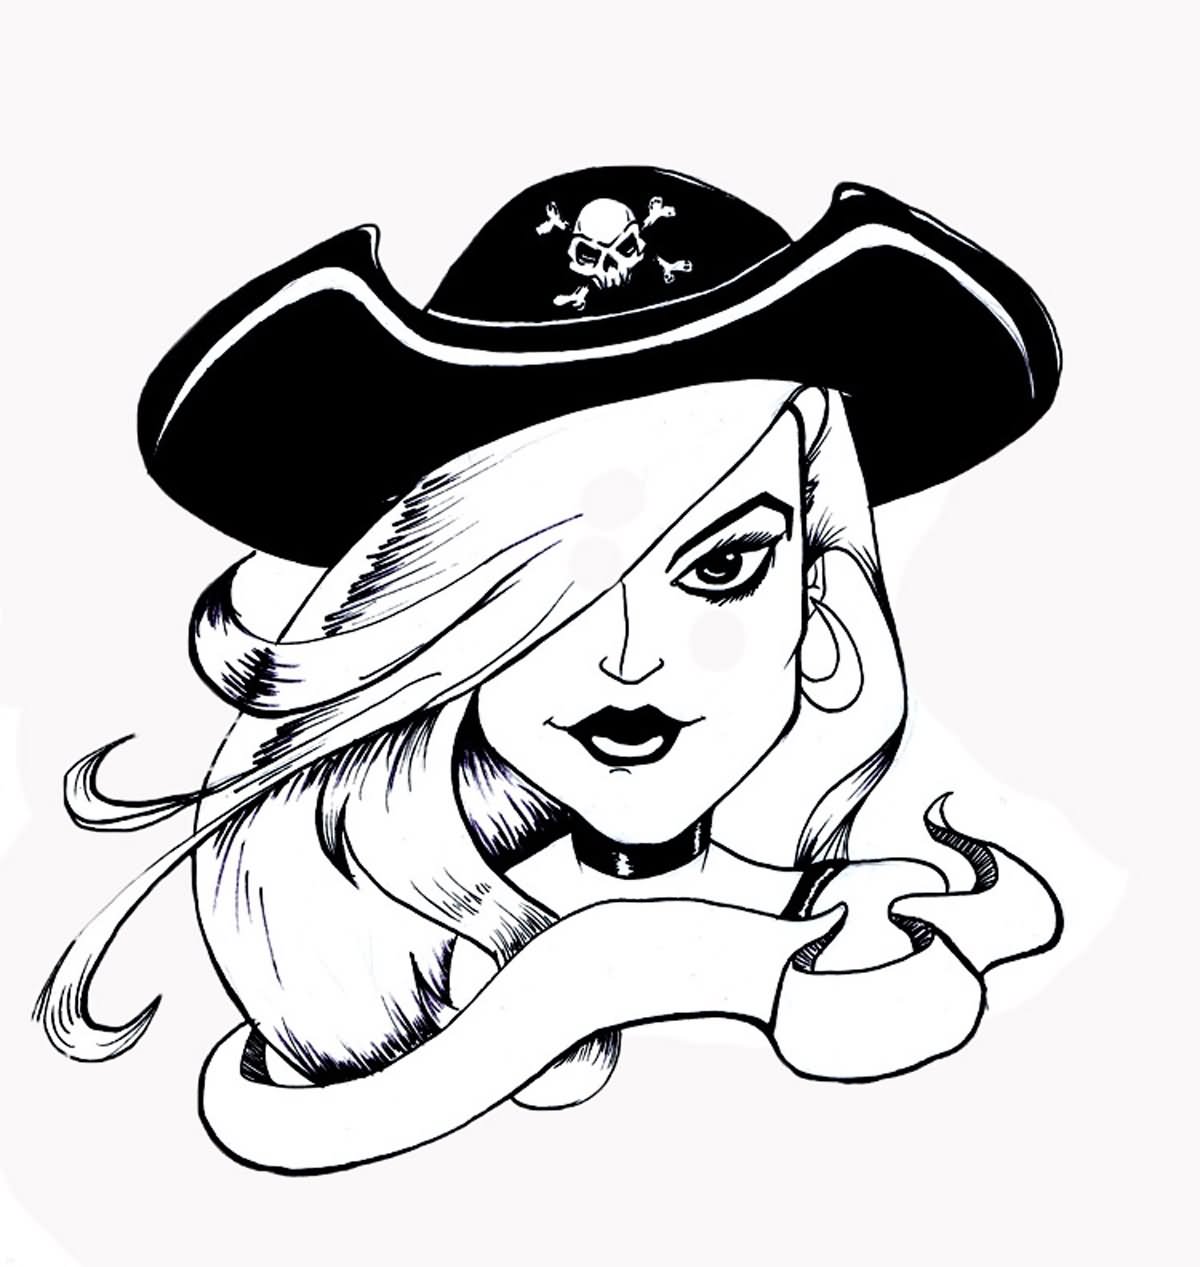 Cute Black Outline Pirate Girl With Ribbon Tattoo Design